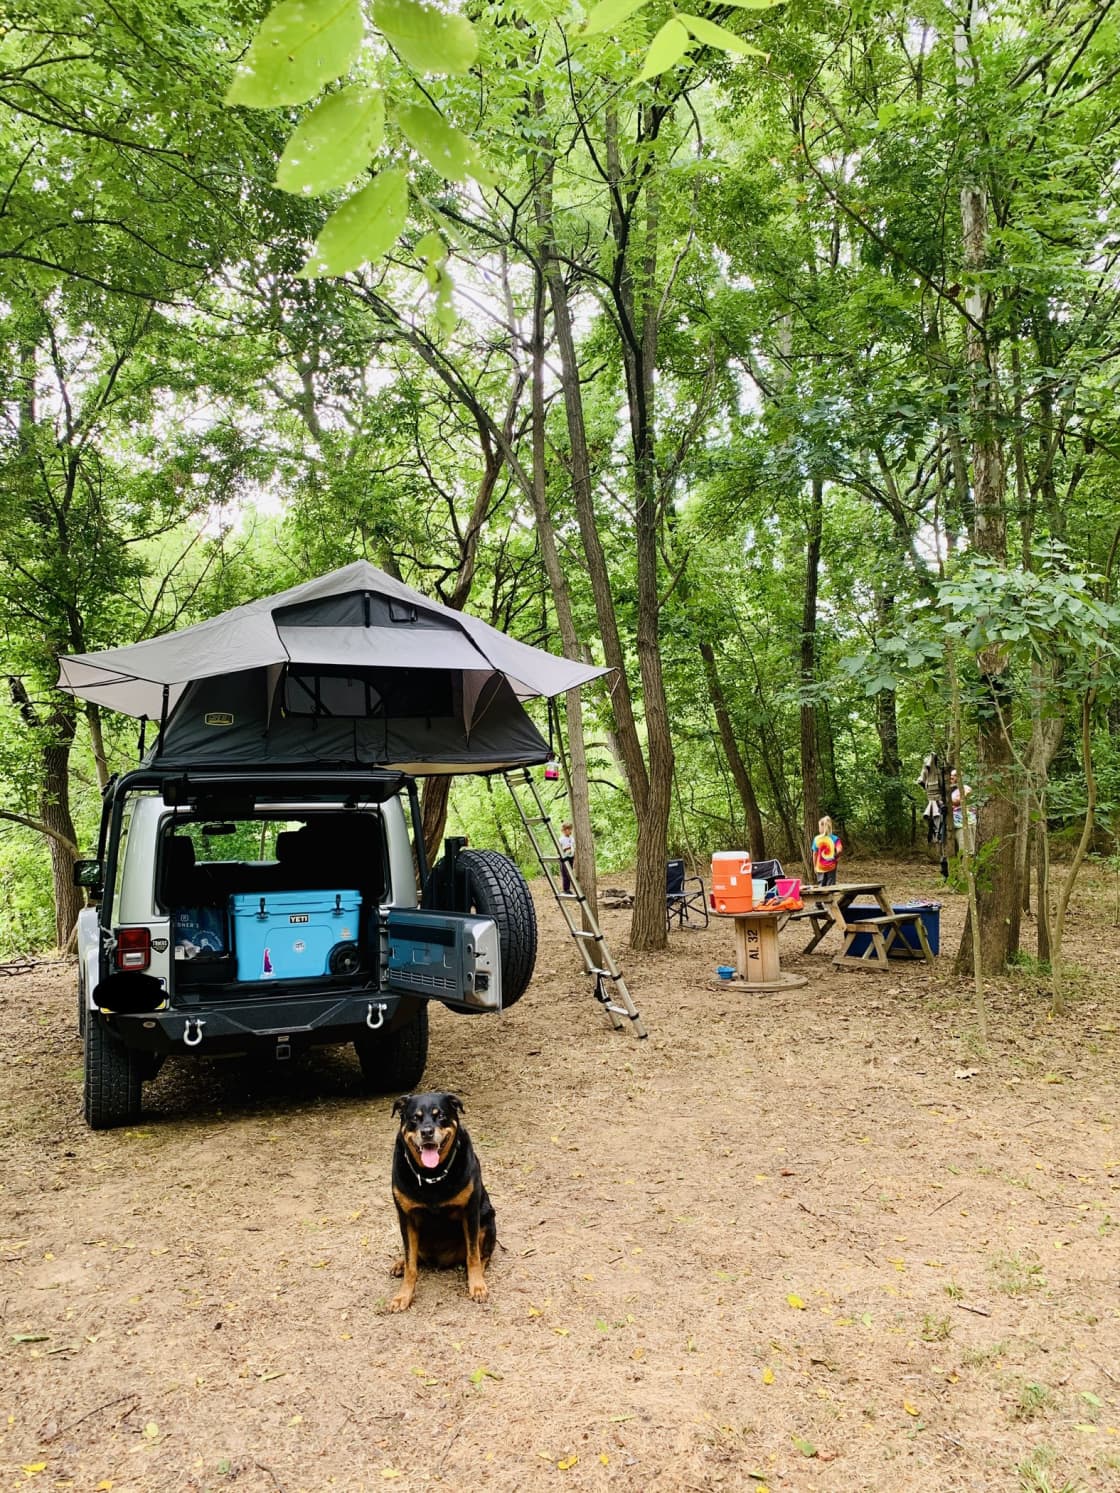 Our set up! (Our dog modeling so well)